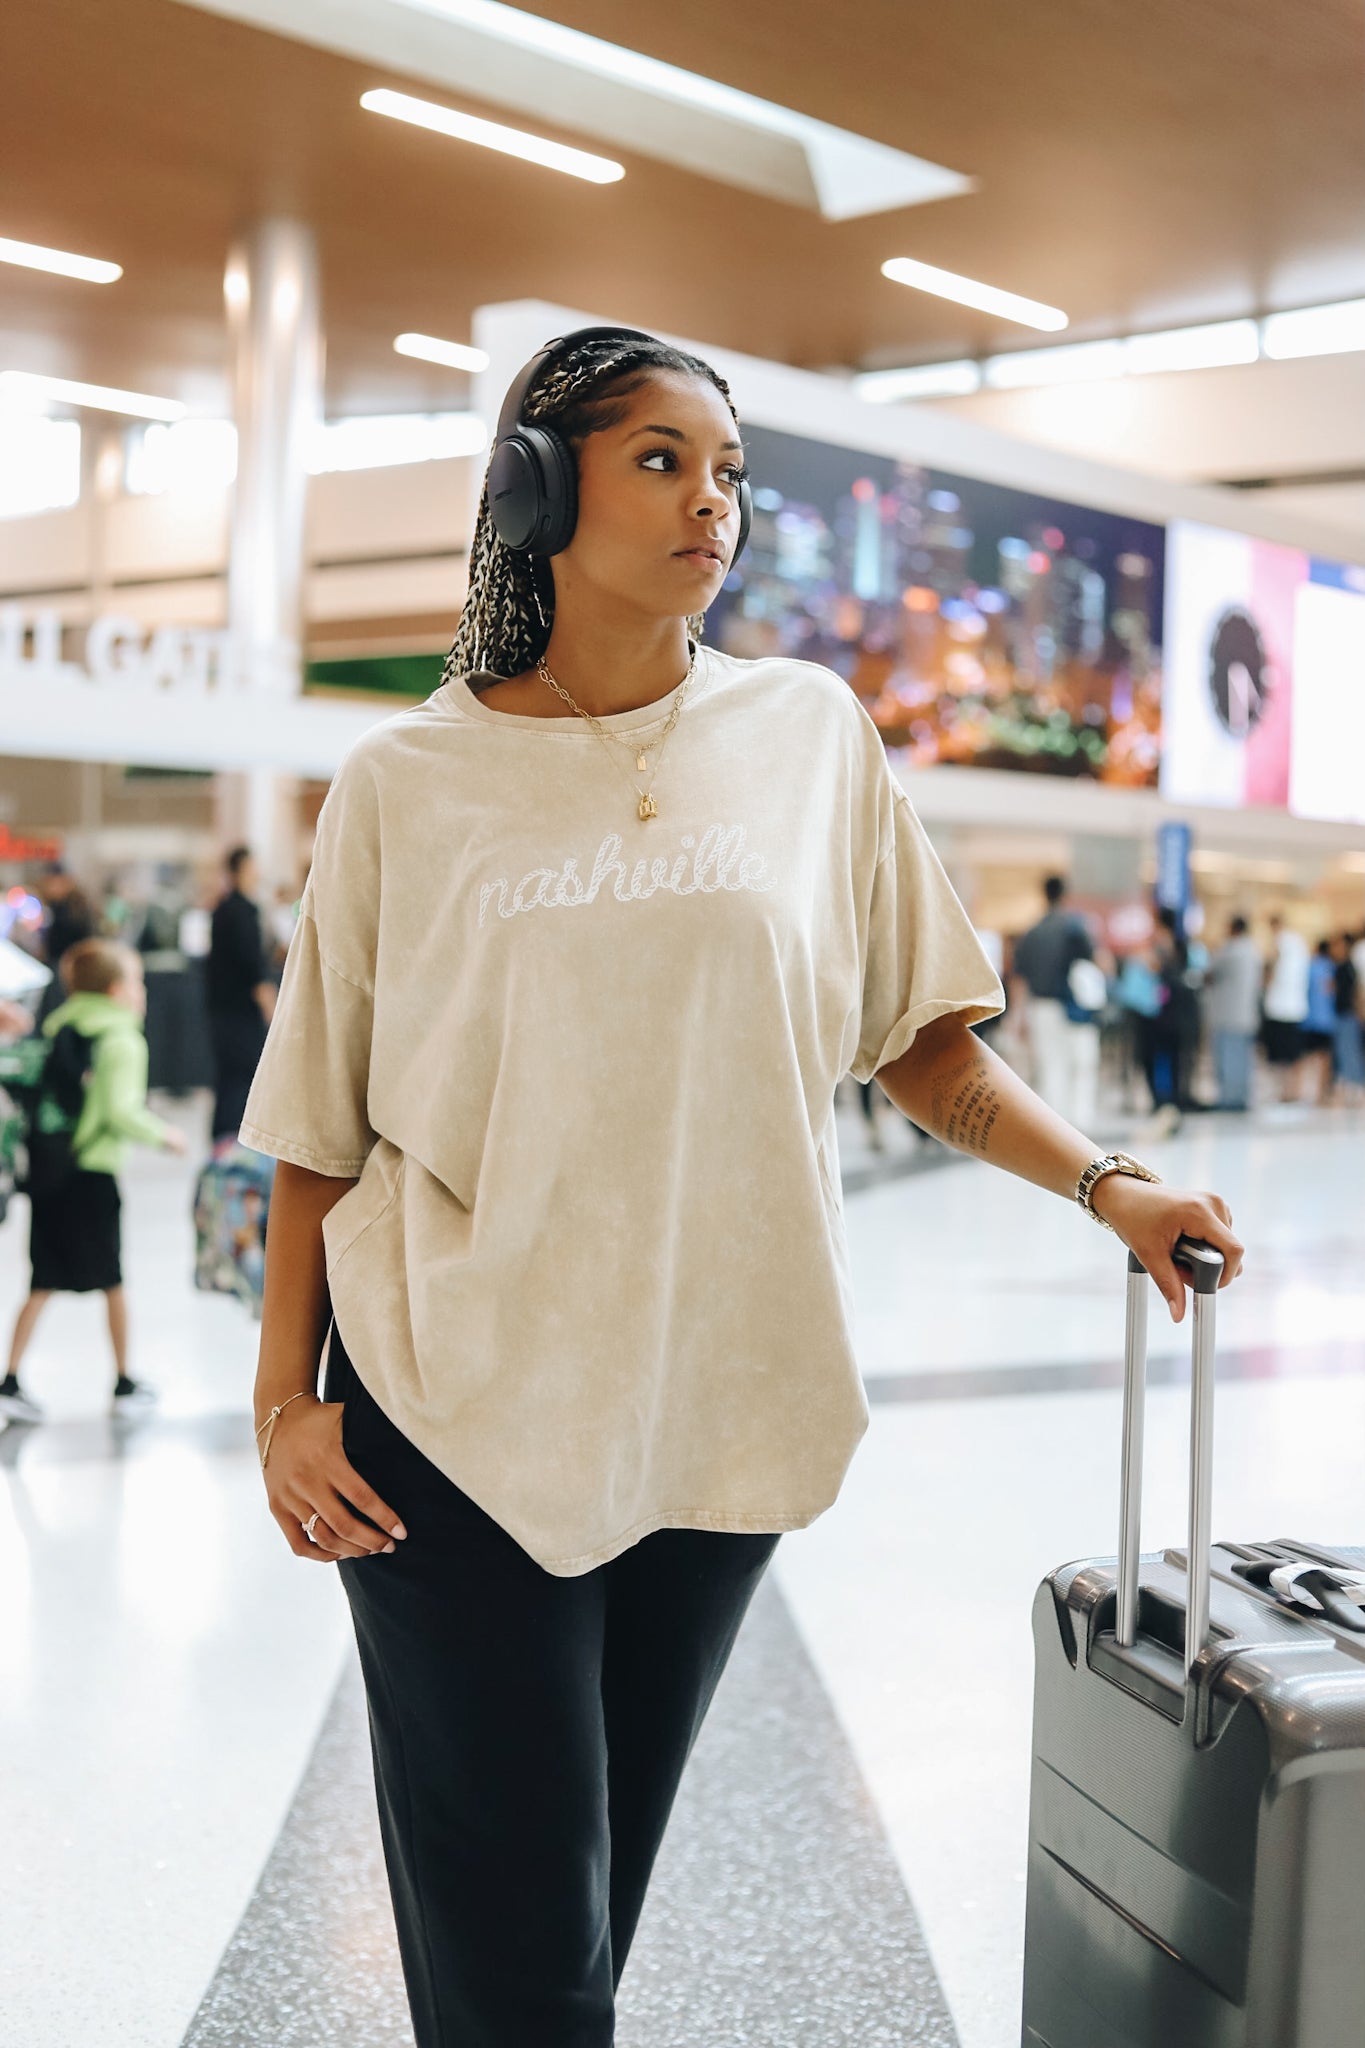 Model wearing the oversize tee while traveling at the airport